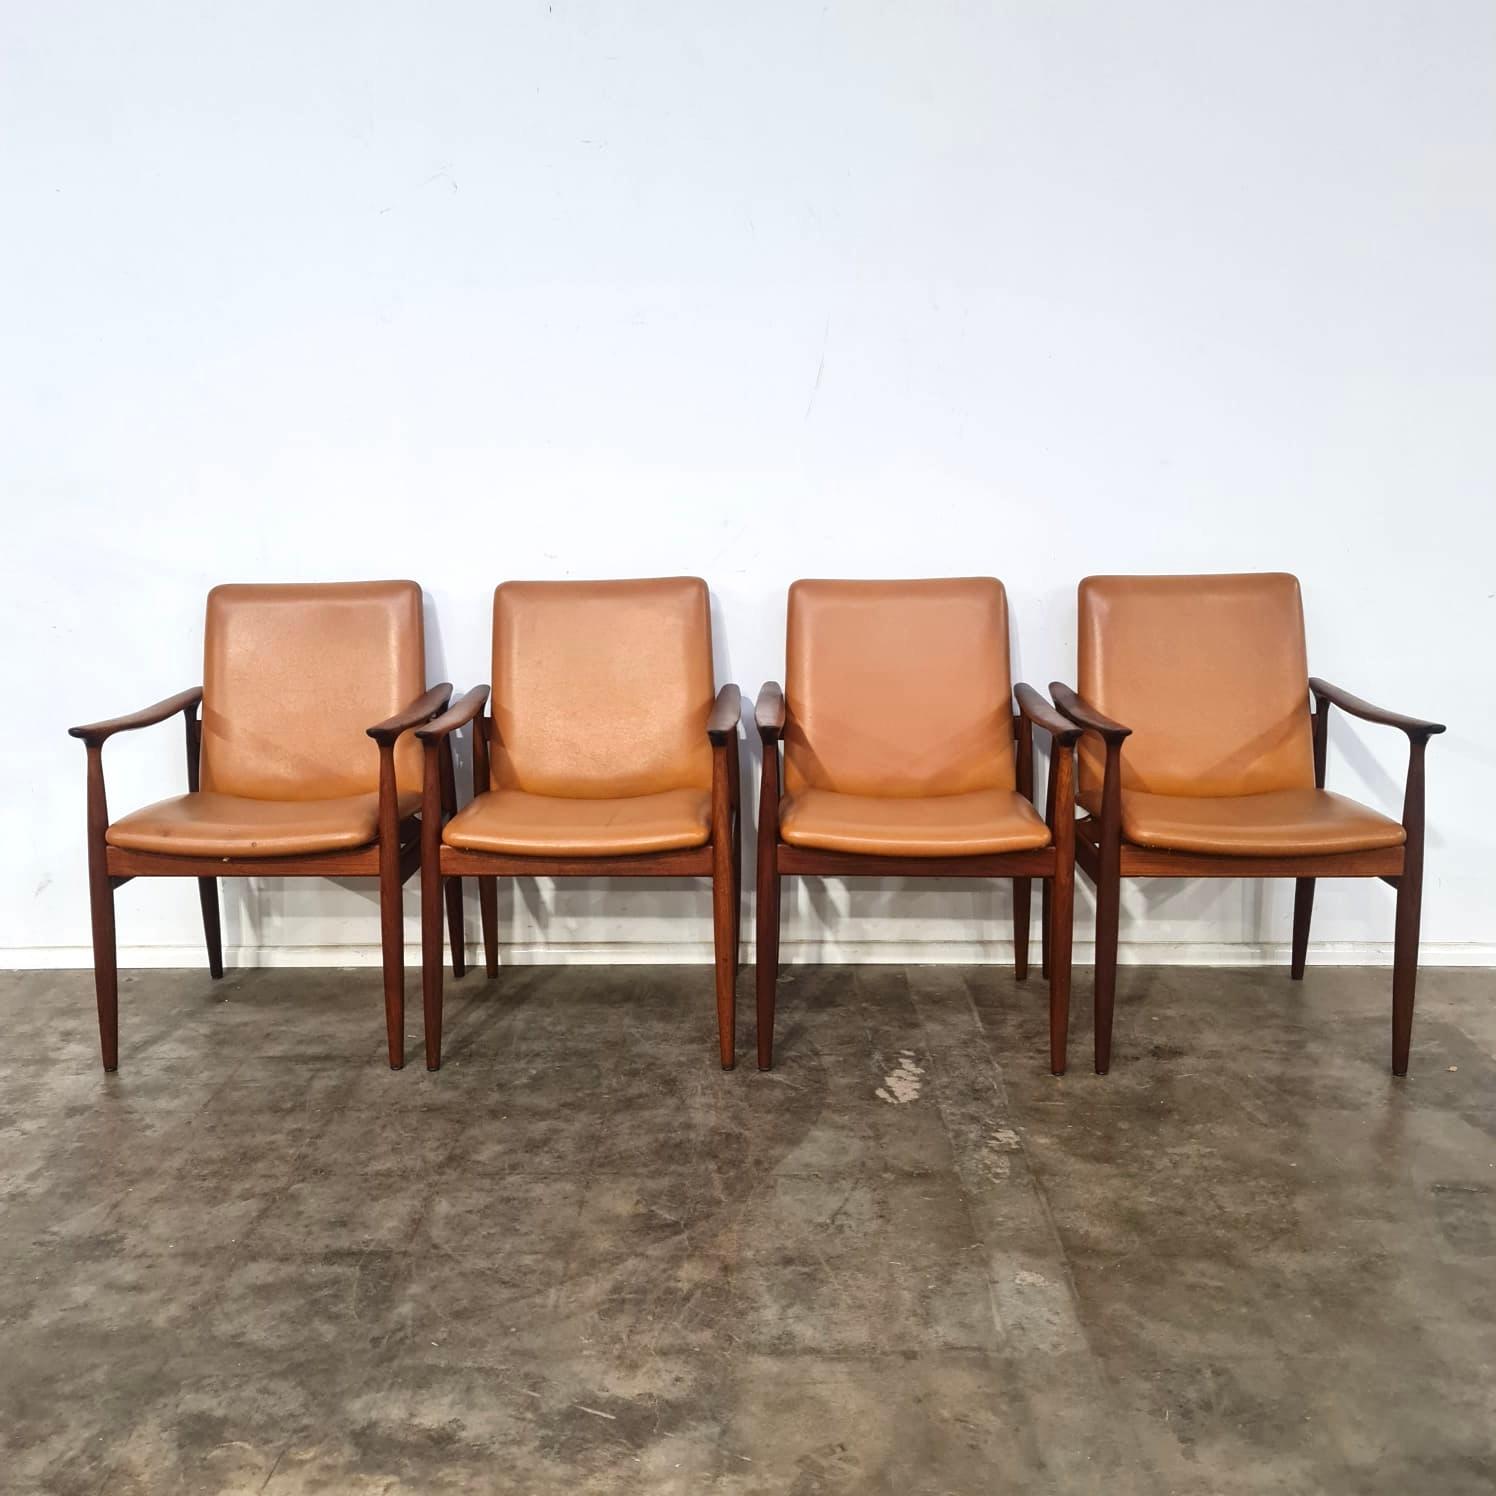 Set of four 1960s Parker Furniture Slab Carvers. The frames are made with solid Tasmainian Blackwood and have been freshly cleaned and pollished. There are a few small nicks and scratches however this does not distract from their beauty or